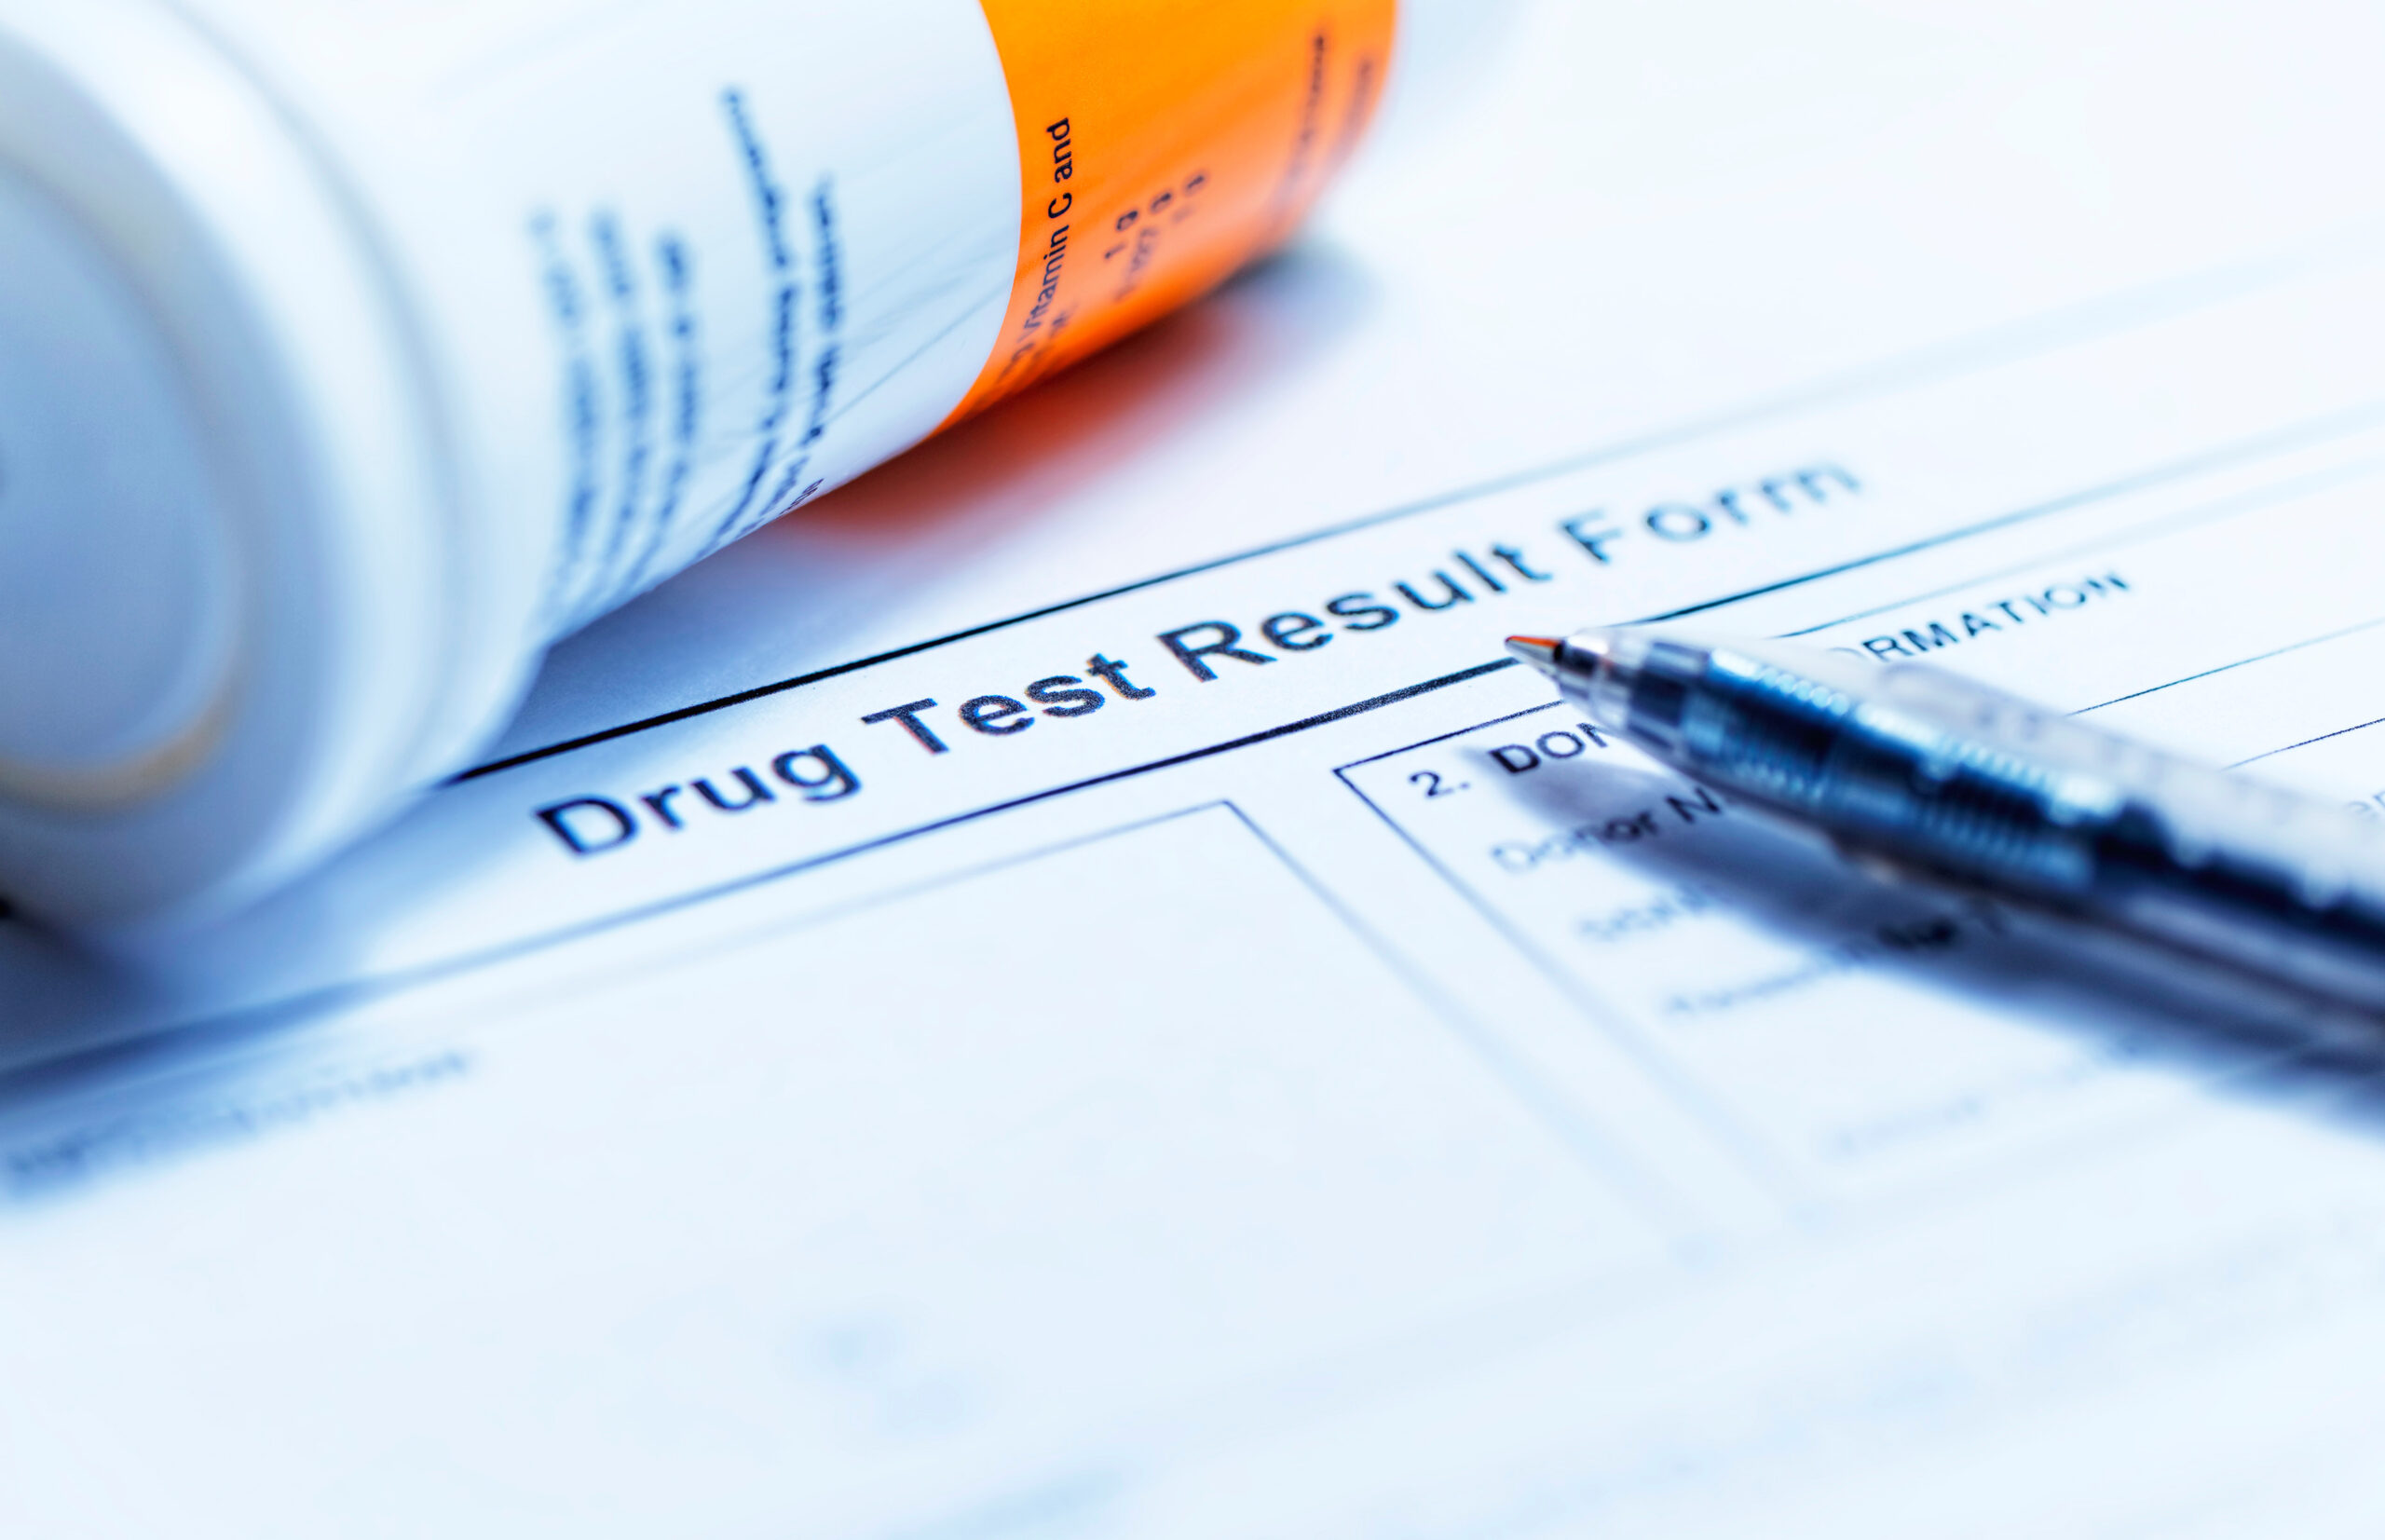 How Do I Book Follicle Drug Testing Services in Greeley, CO?